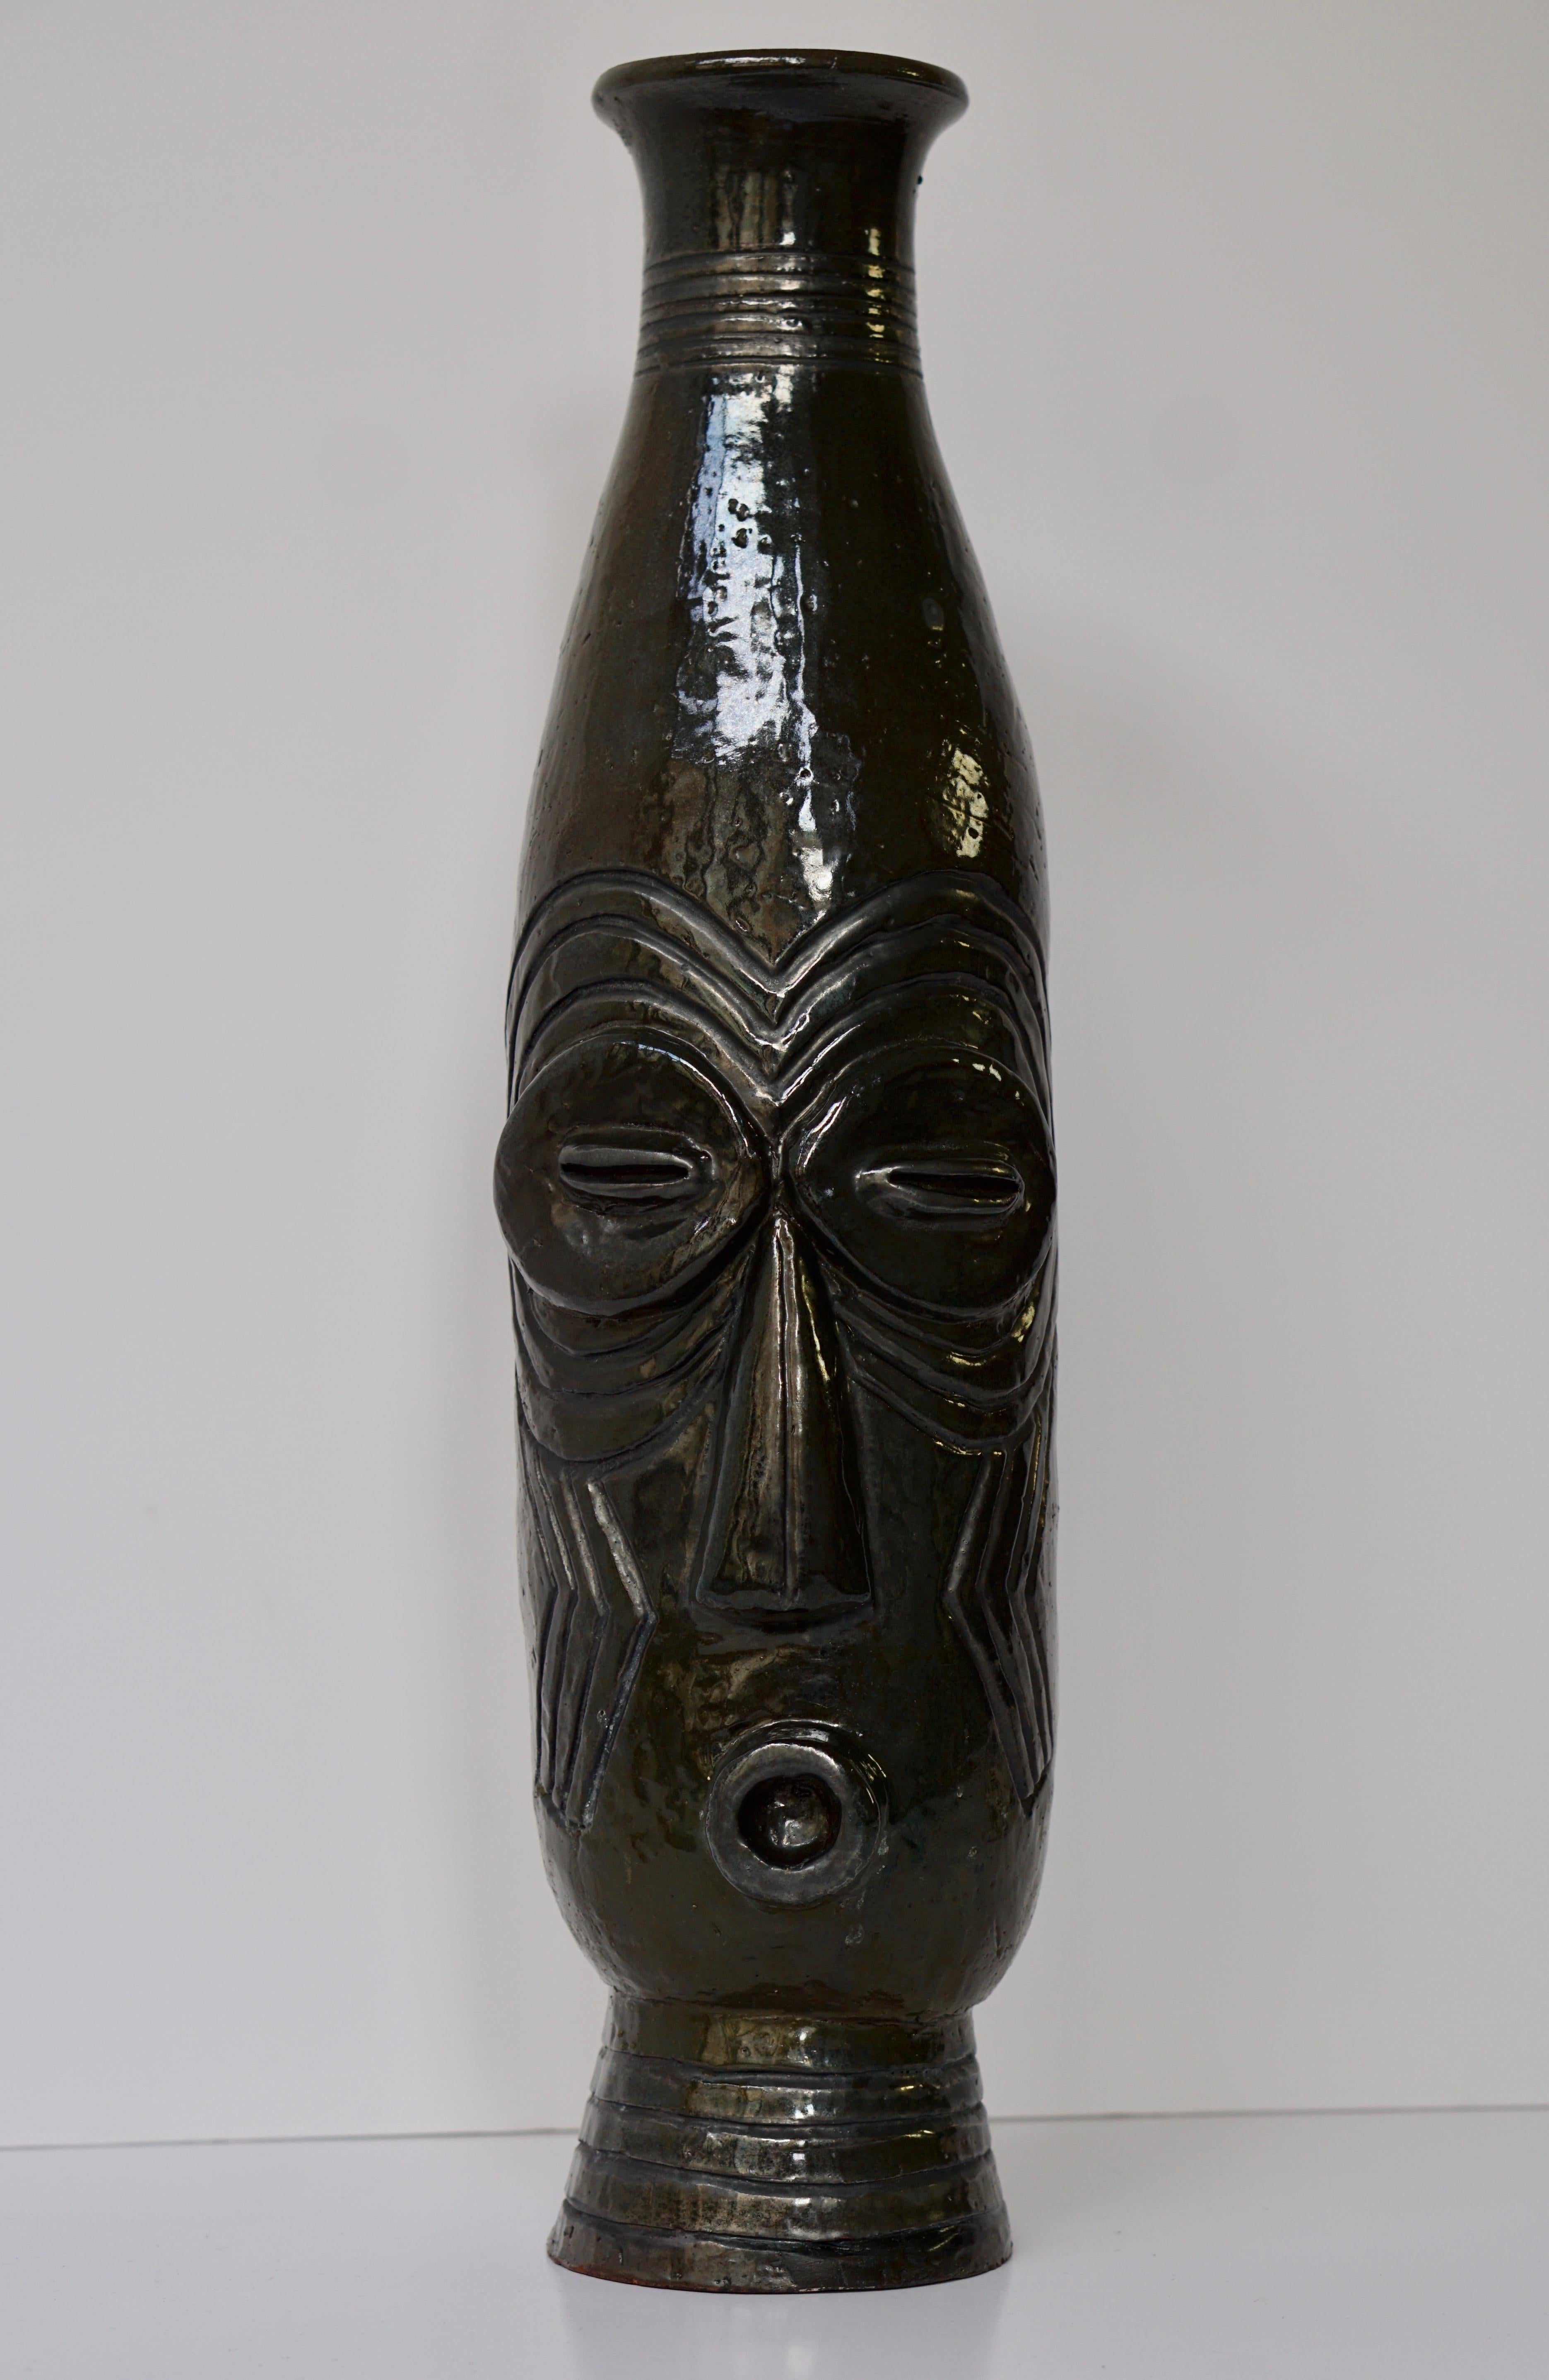 Beautiful African tribal vase with a face; the piece is very well done. Very cool unique piece.
Measures: Height 52 cm.
Diameter 14 cm.
Weight 3 kg.